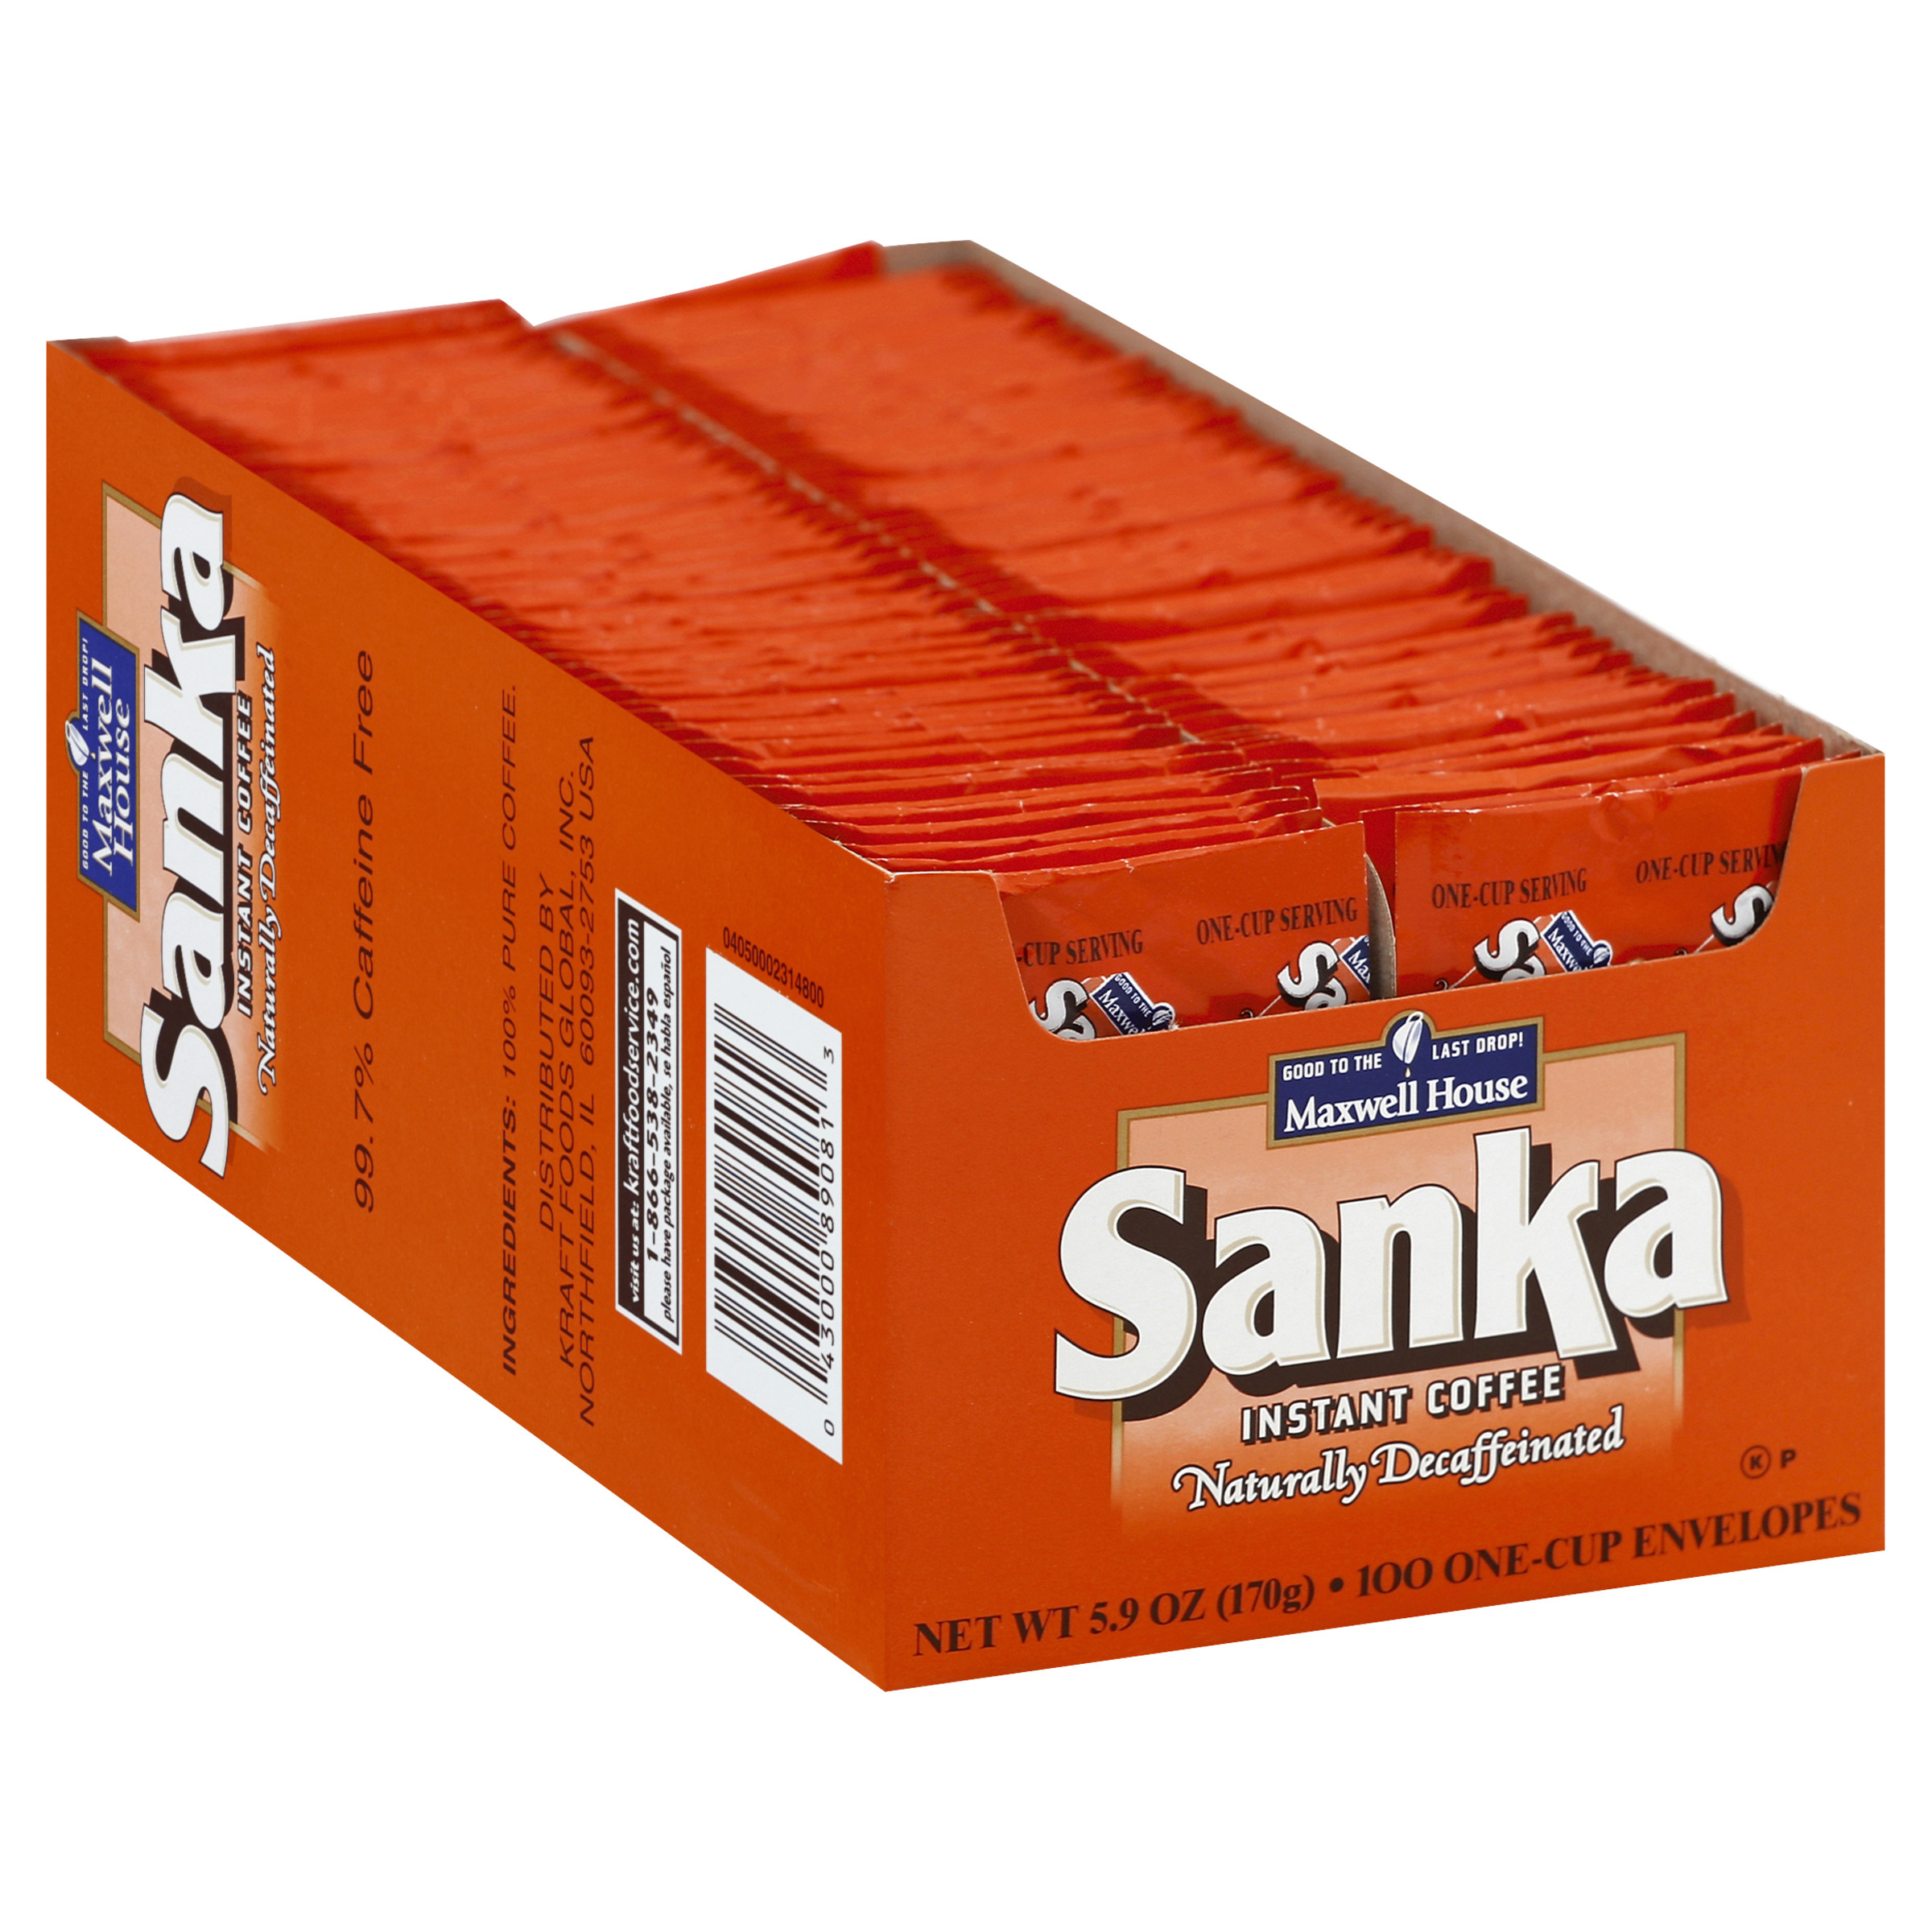 Sanka Decaf Instant Coffee Single Serve Packets, 100 ct Box - image 1 of 9